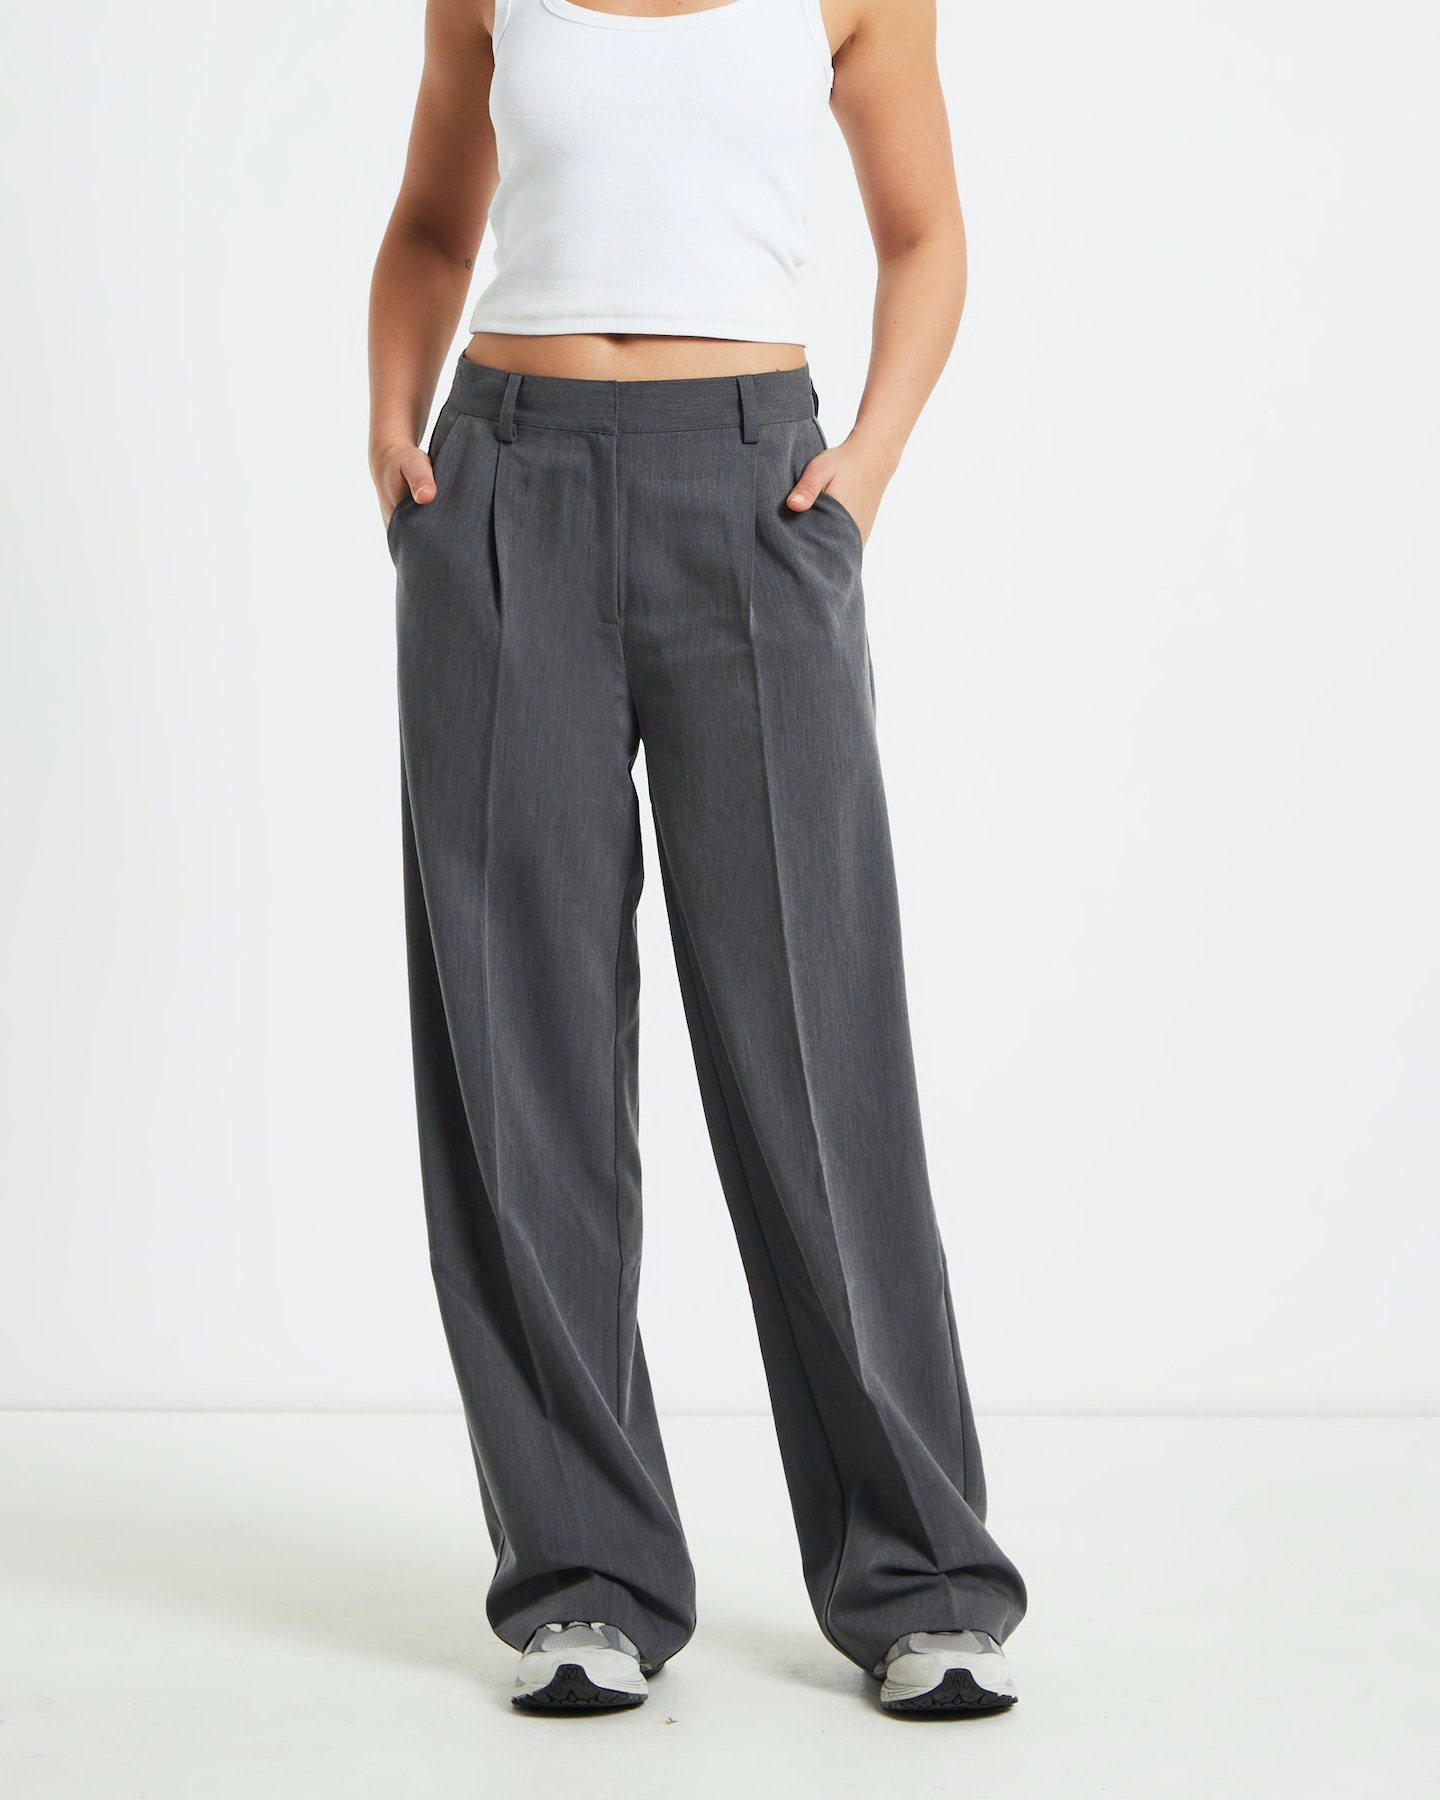 https://www.surfstitch.com/on/demandware.static/-/Sites-ss-master-catalog/default/dw07e5a4e2/images/1000105850-GRY-XS/GREY-WOMENS-CLOTHING-ALICE-IN-THE-EVE-PANTS-1000105850-GRY-XS_1.JPG